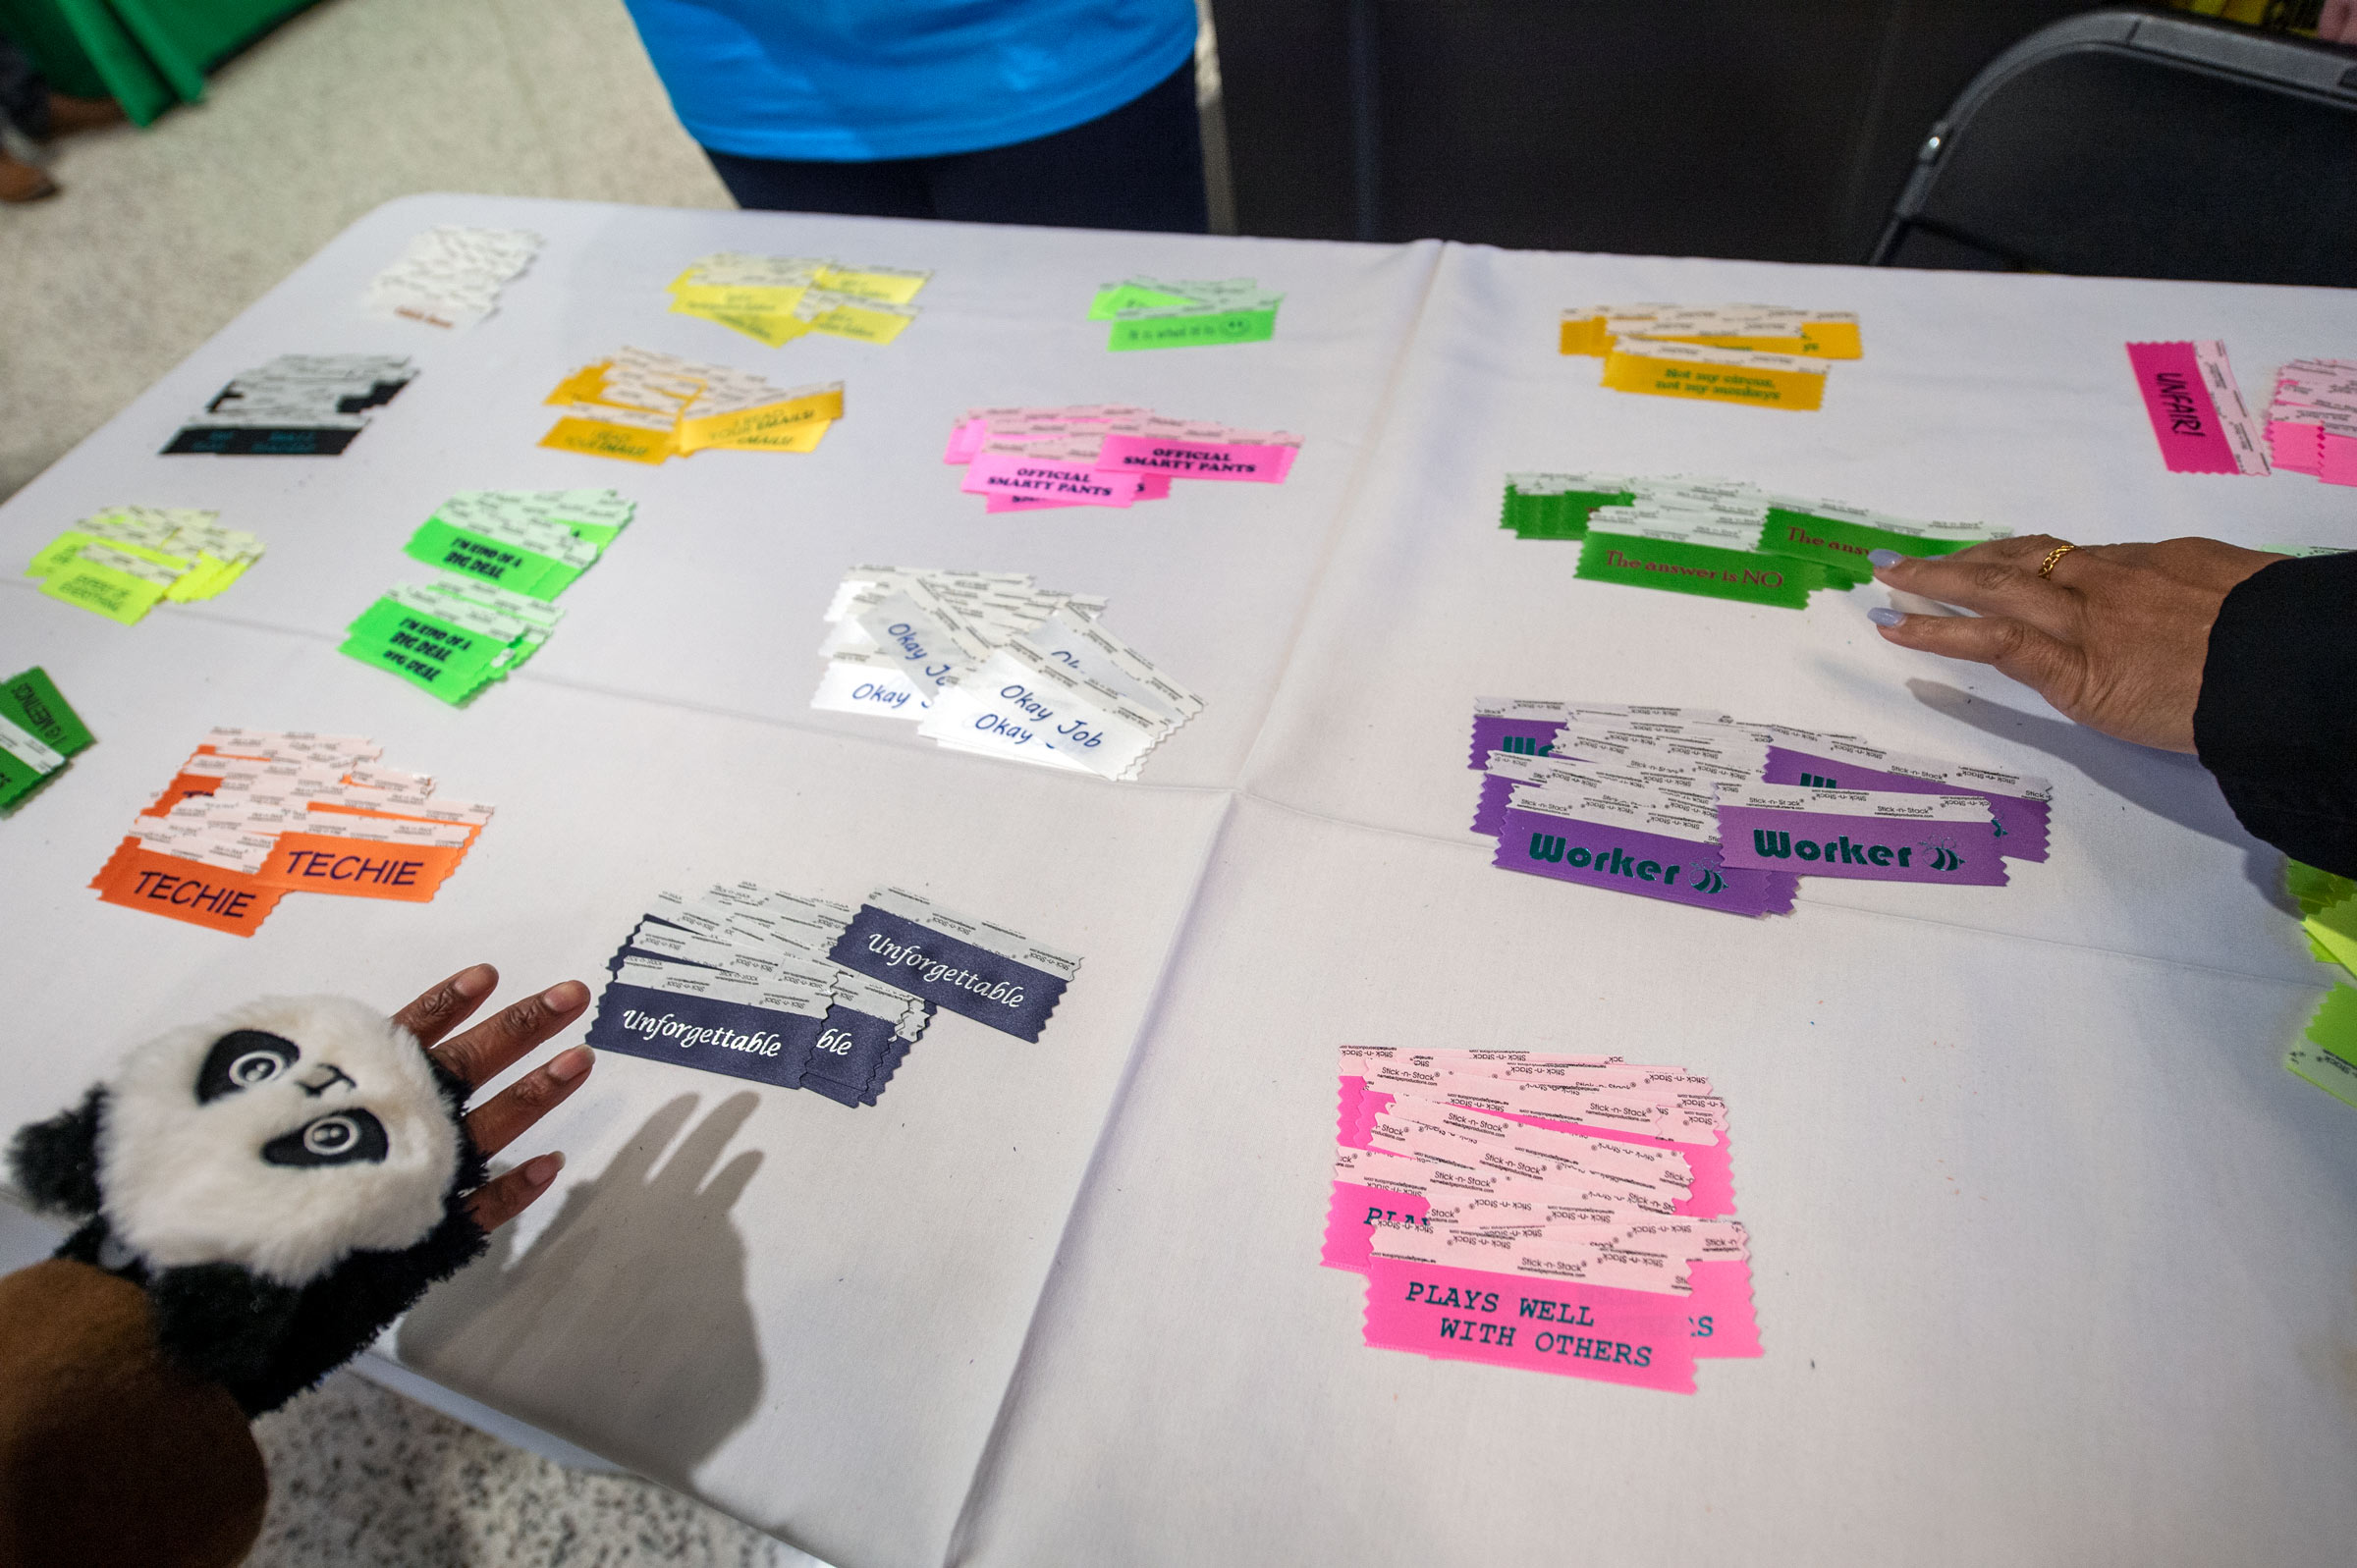 Employees hands reach for &quot;fun&quot; ribbons to add to their conference nametags.